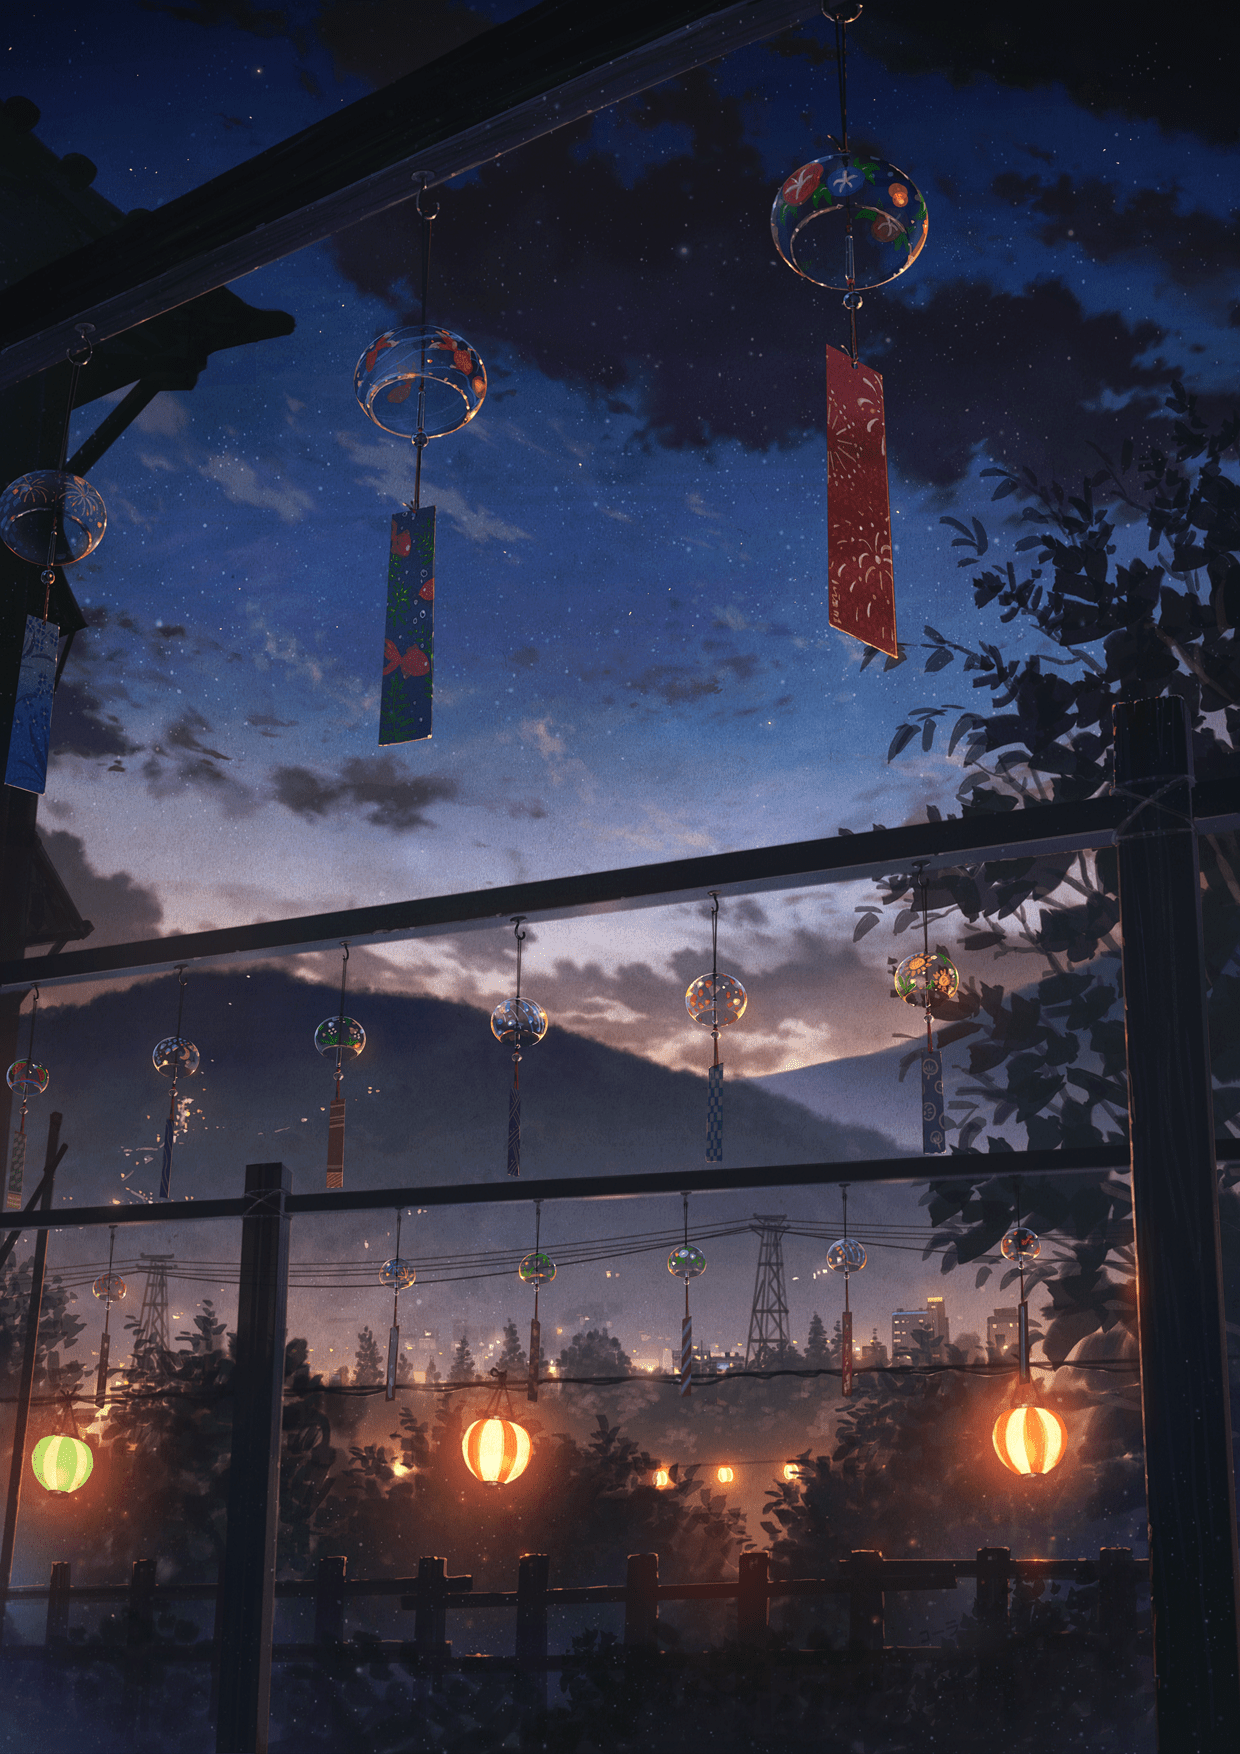 A digital painting of a night time view from a Japanese style room. - Scenery, night, indigo, anime landscape, Android